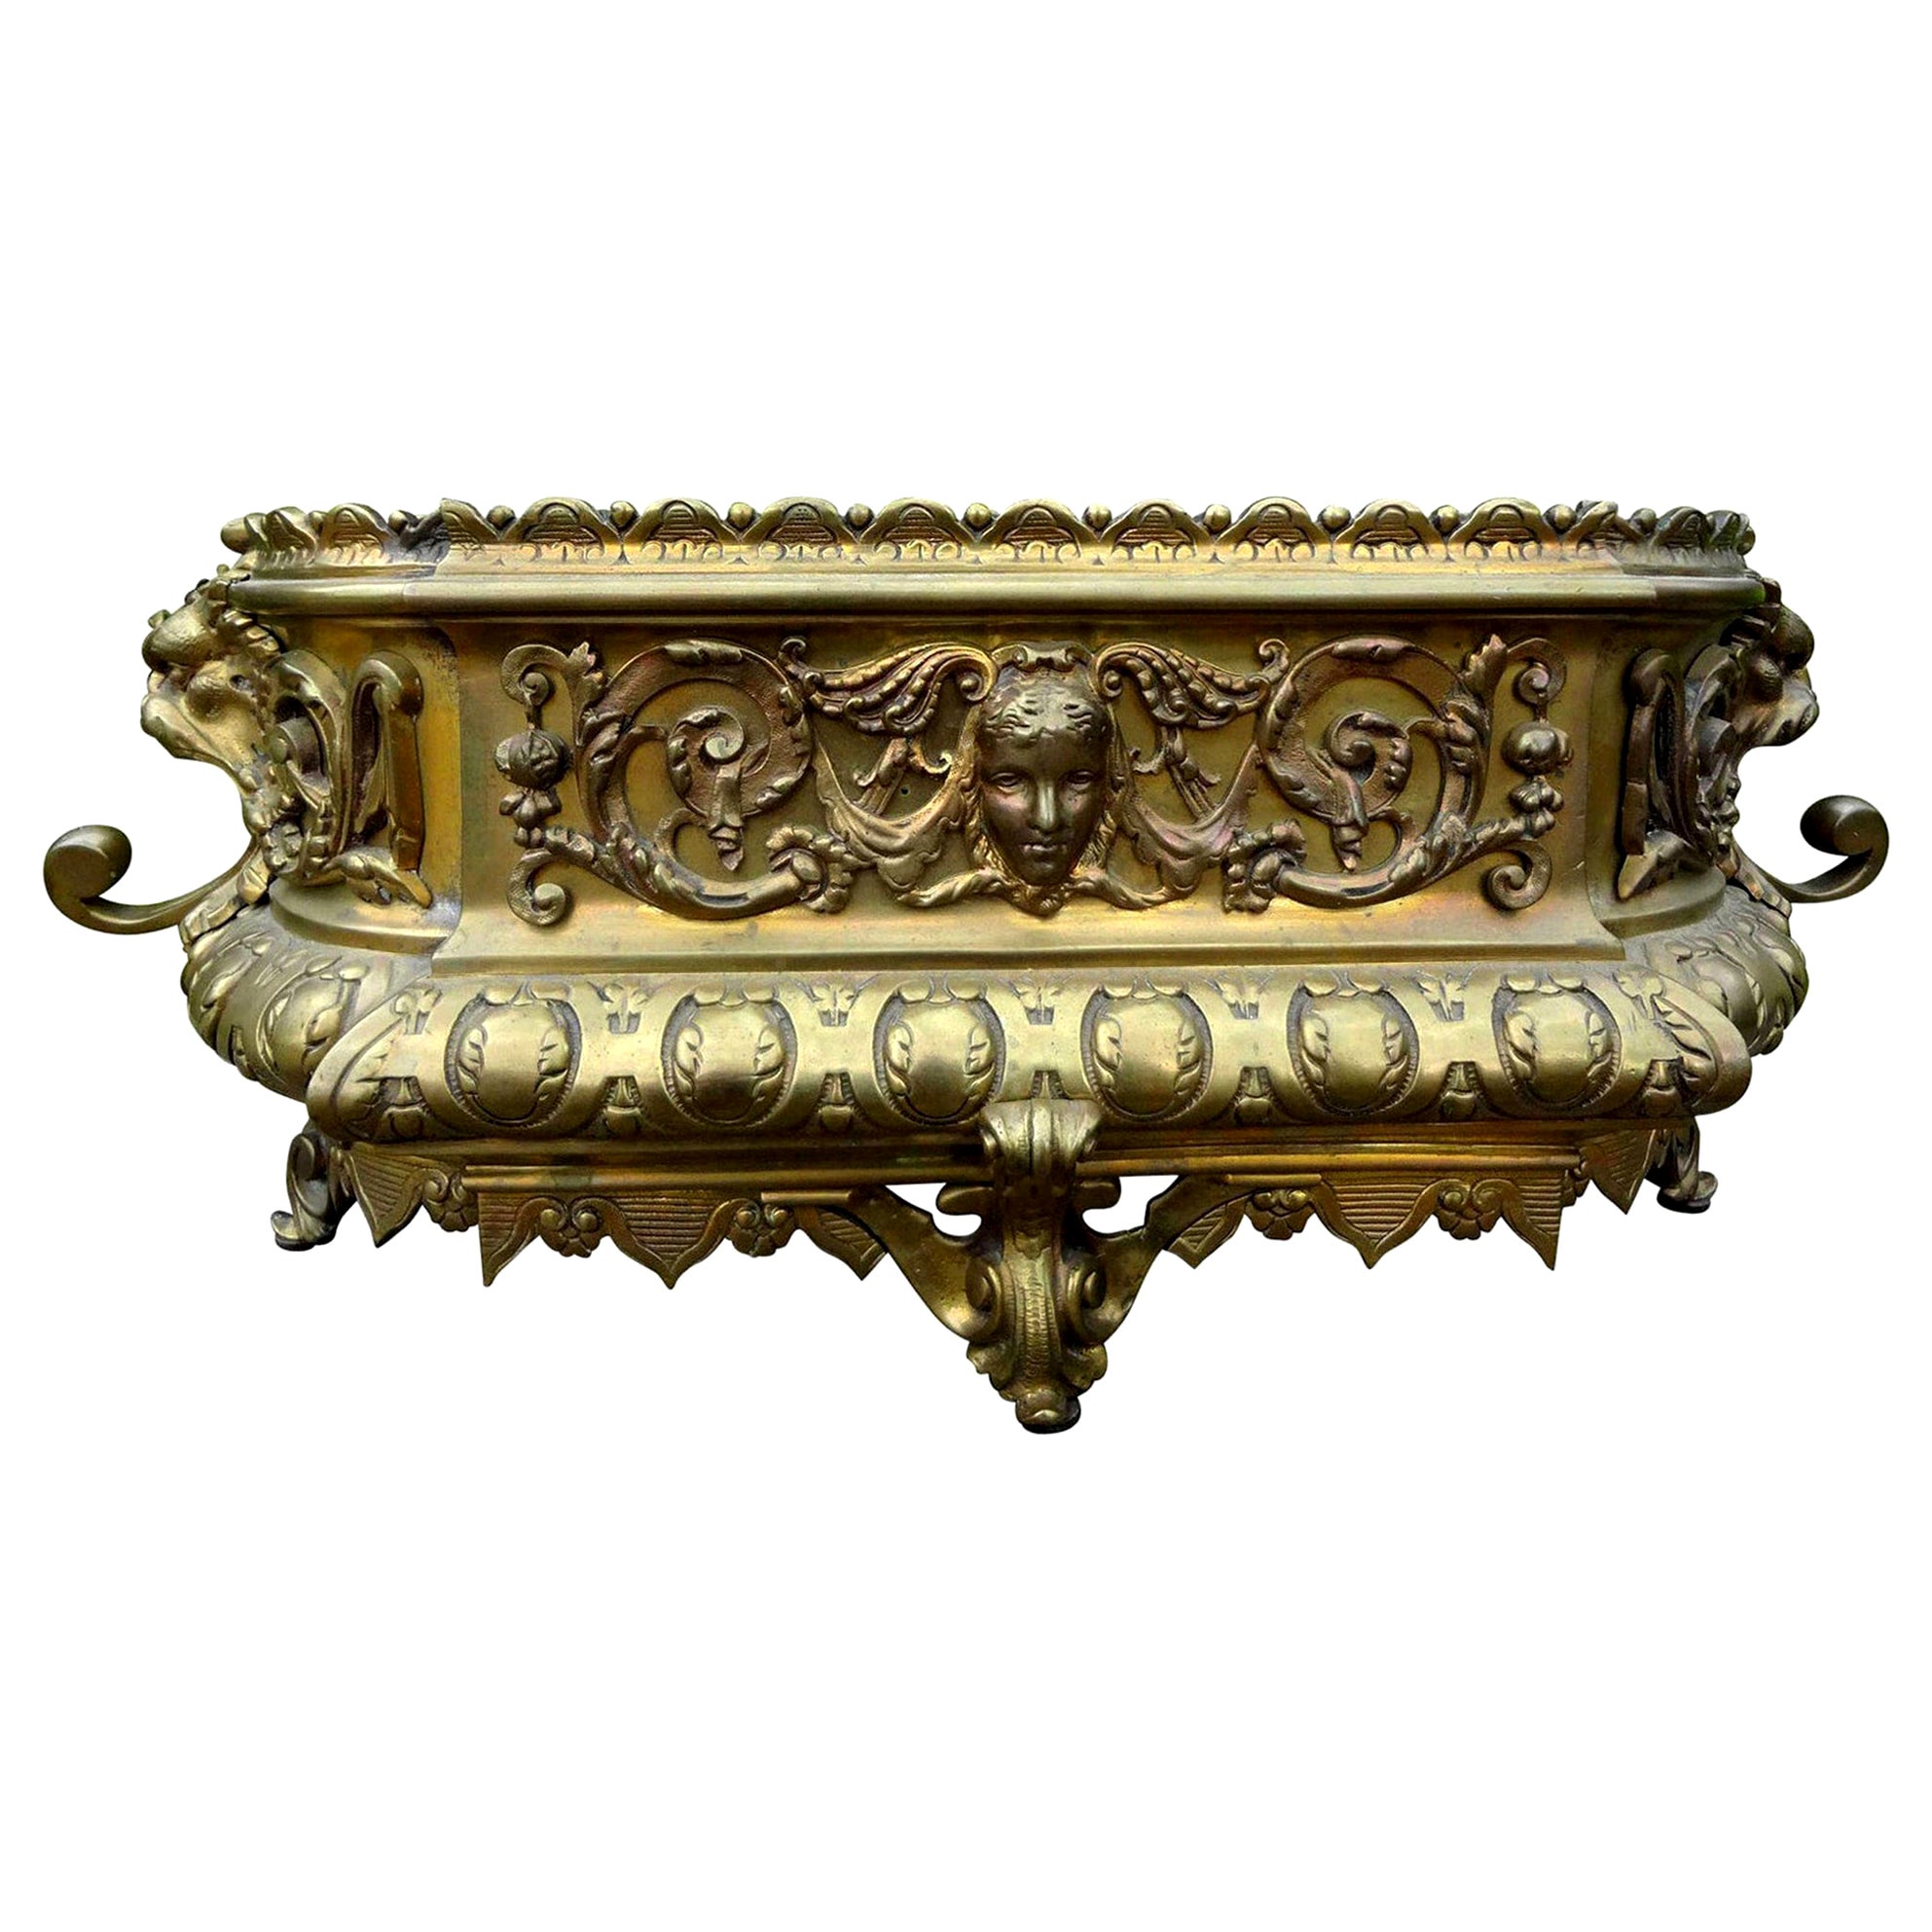 19th Century, French, Brass Jardinière or Planter For Sale